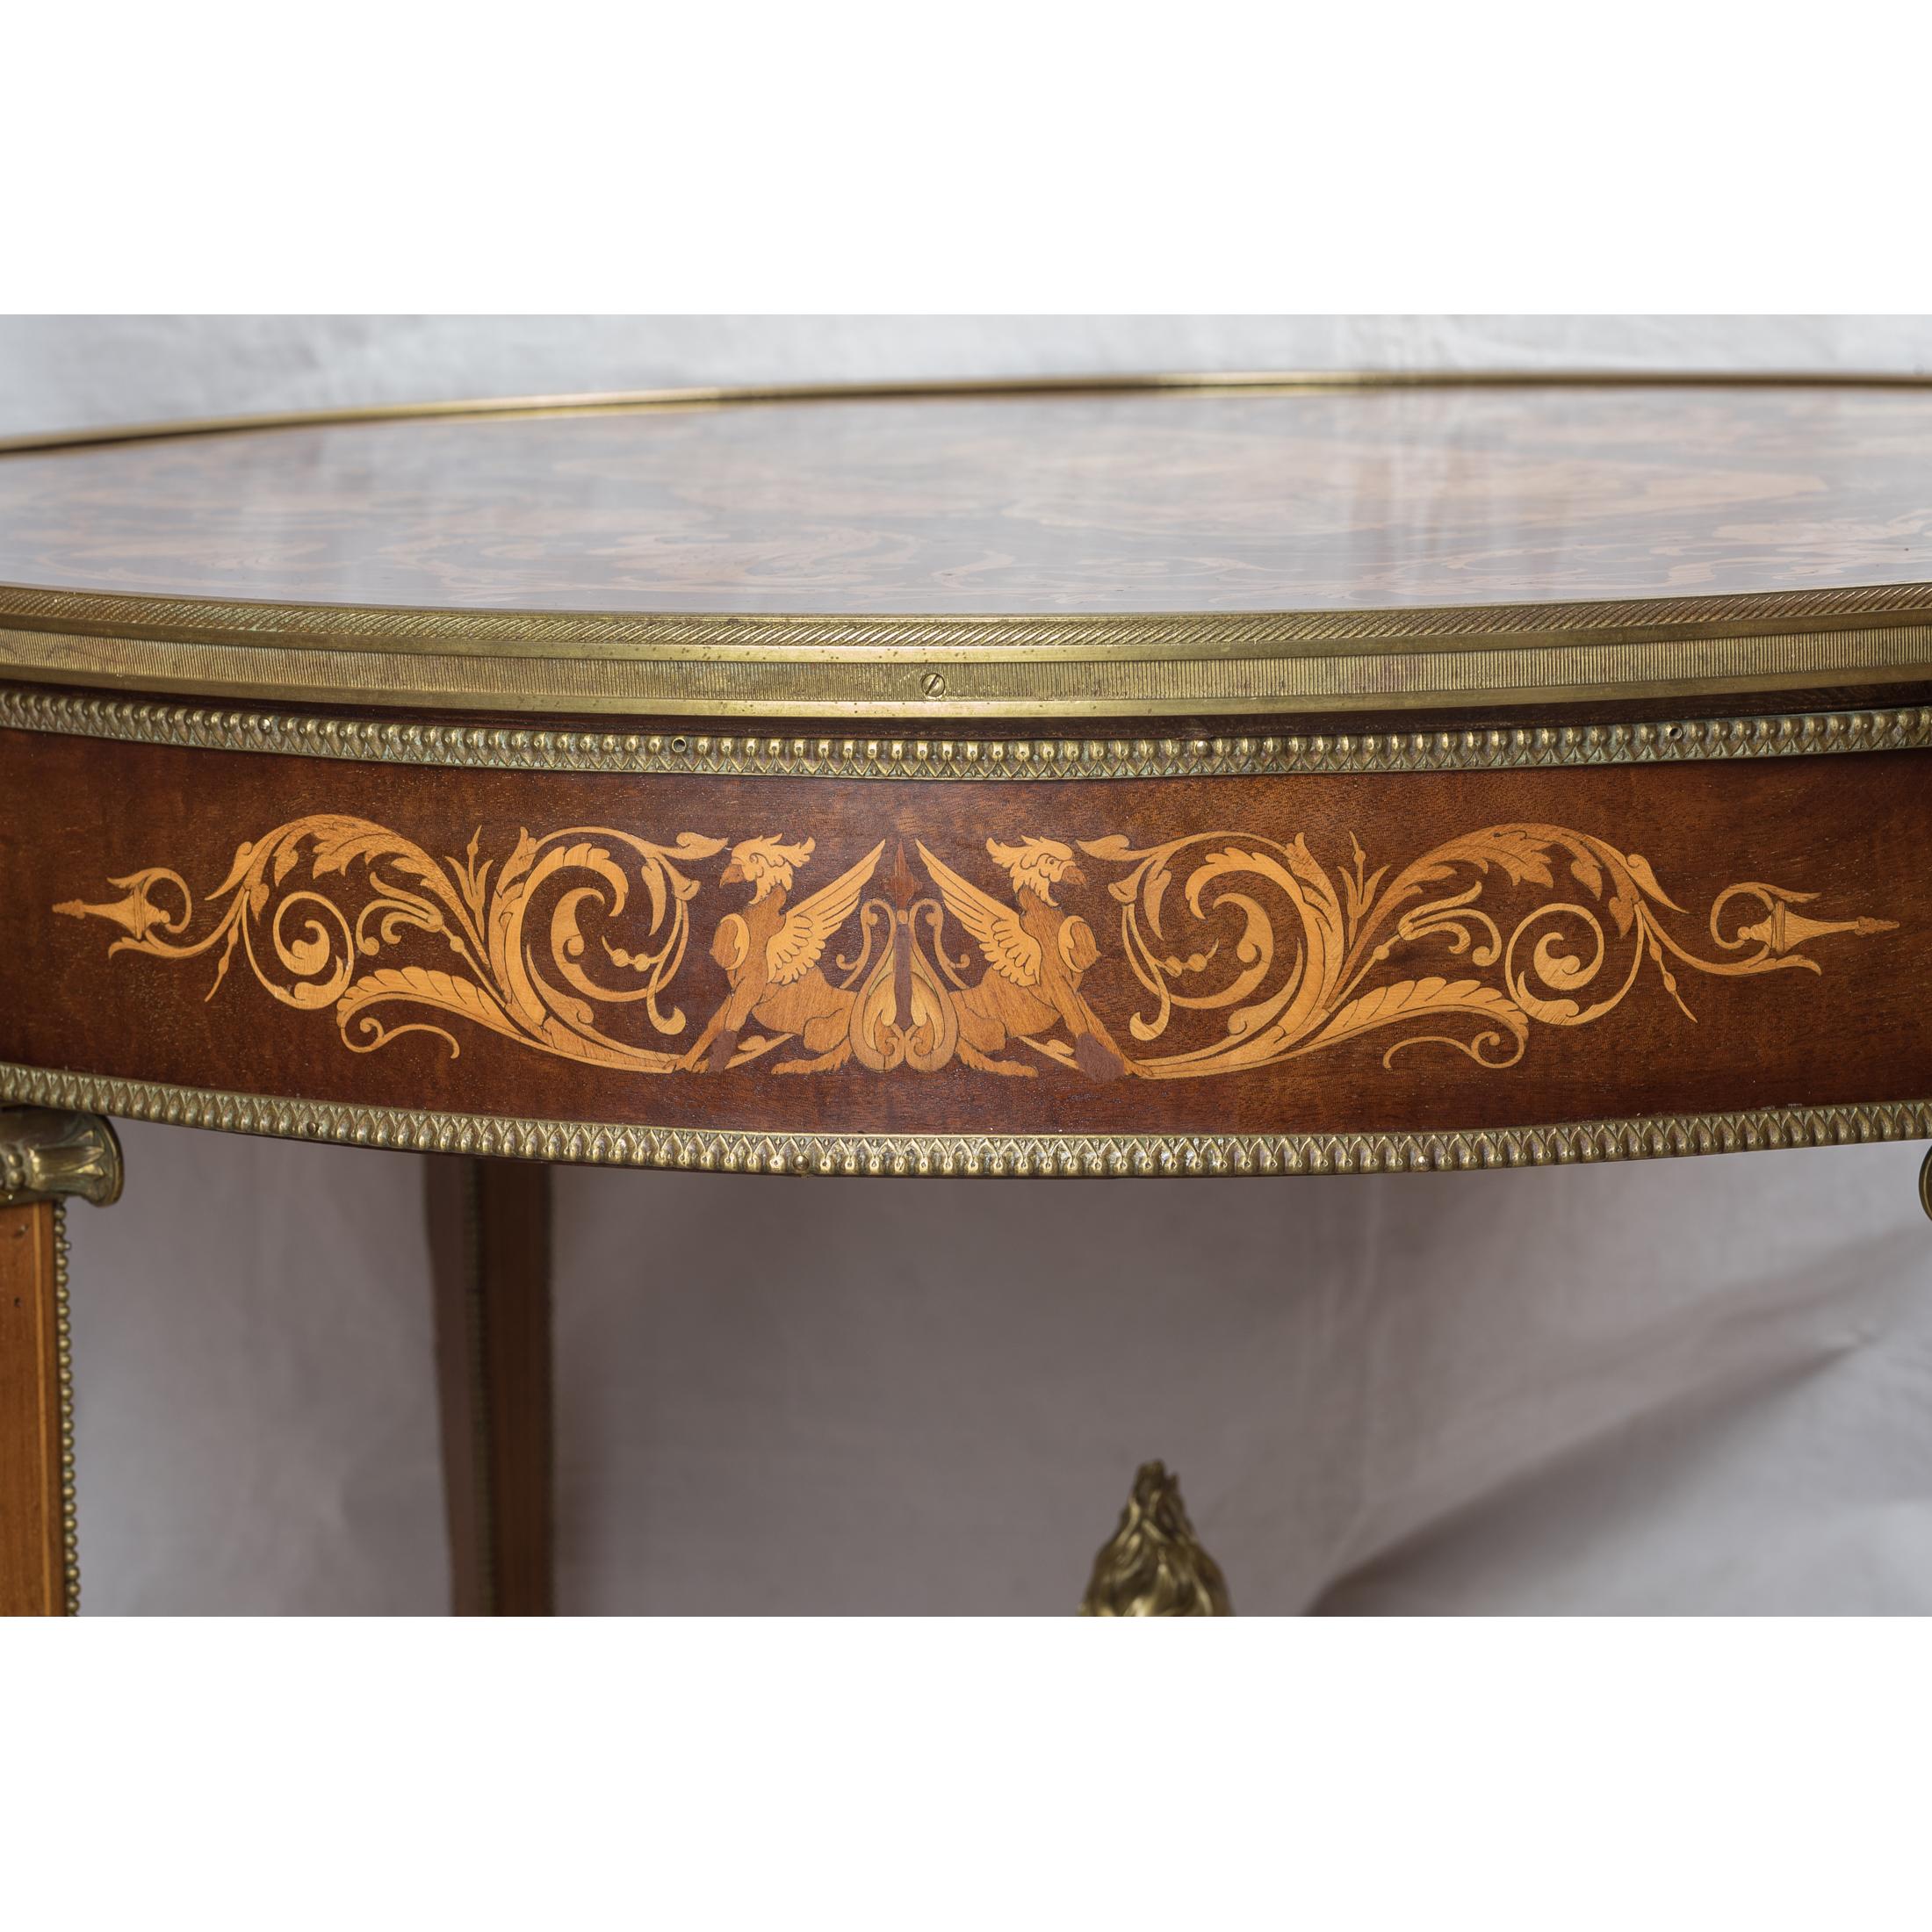 A fabulous neoclassical Ormolu-mounted parquetry and satinwood marquetry center table. This fabulous table features beautiful marquetry decoration in kingwood with elegant ormolu borders. The central panel is beautifully inlaid with an elegant urn